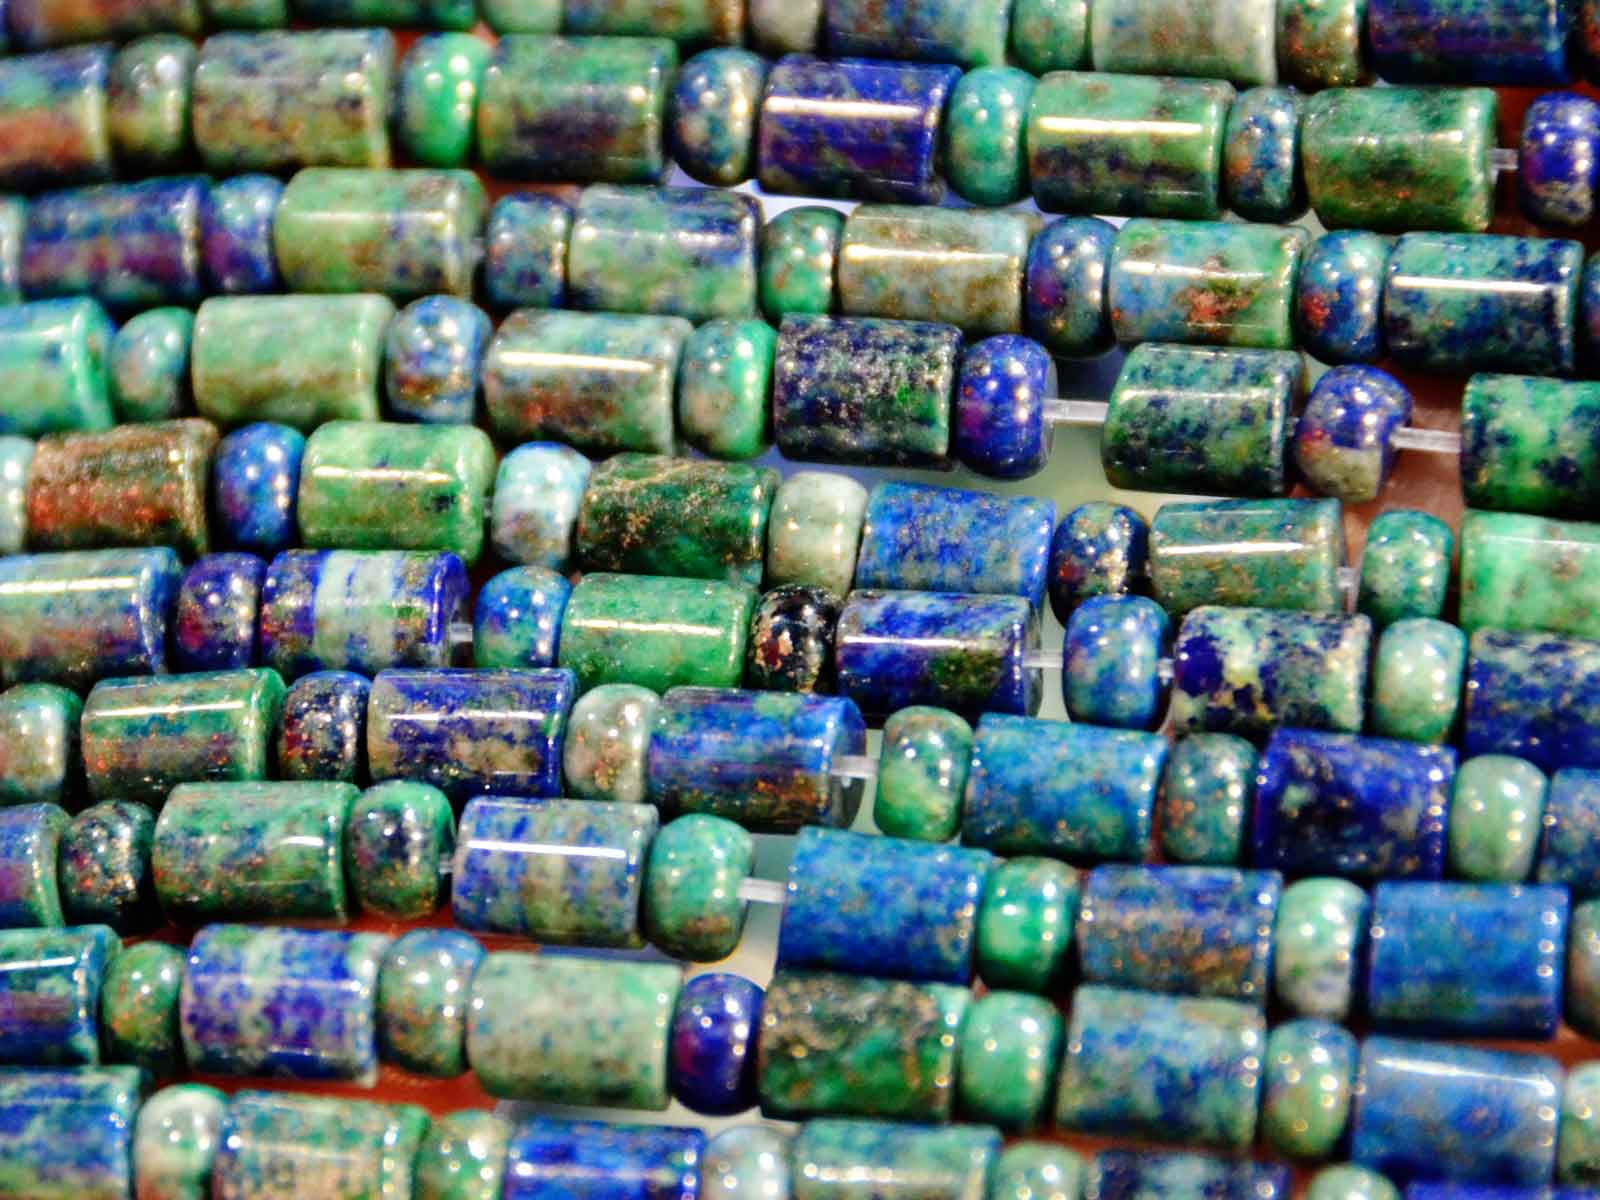 Stone beads at Bead and Button Show